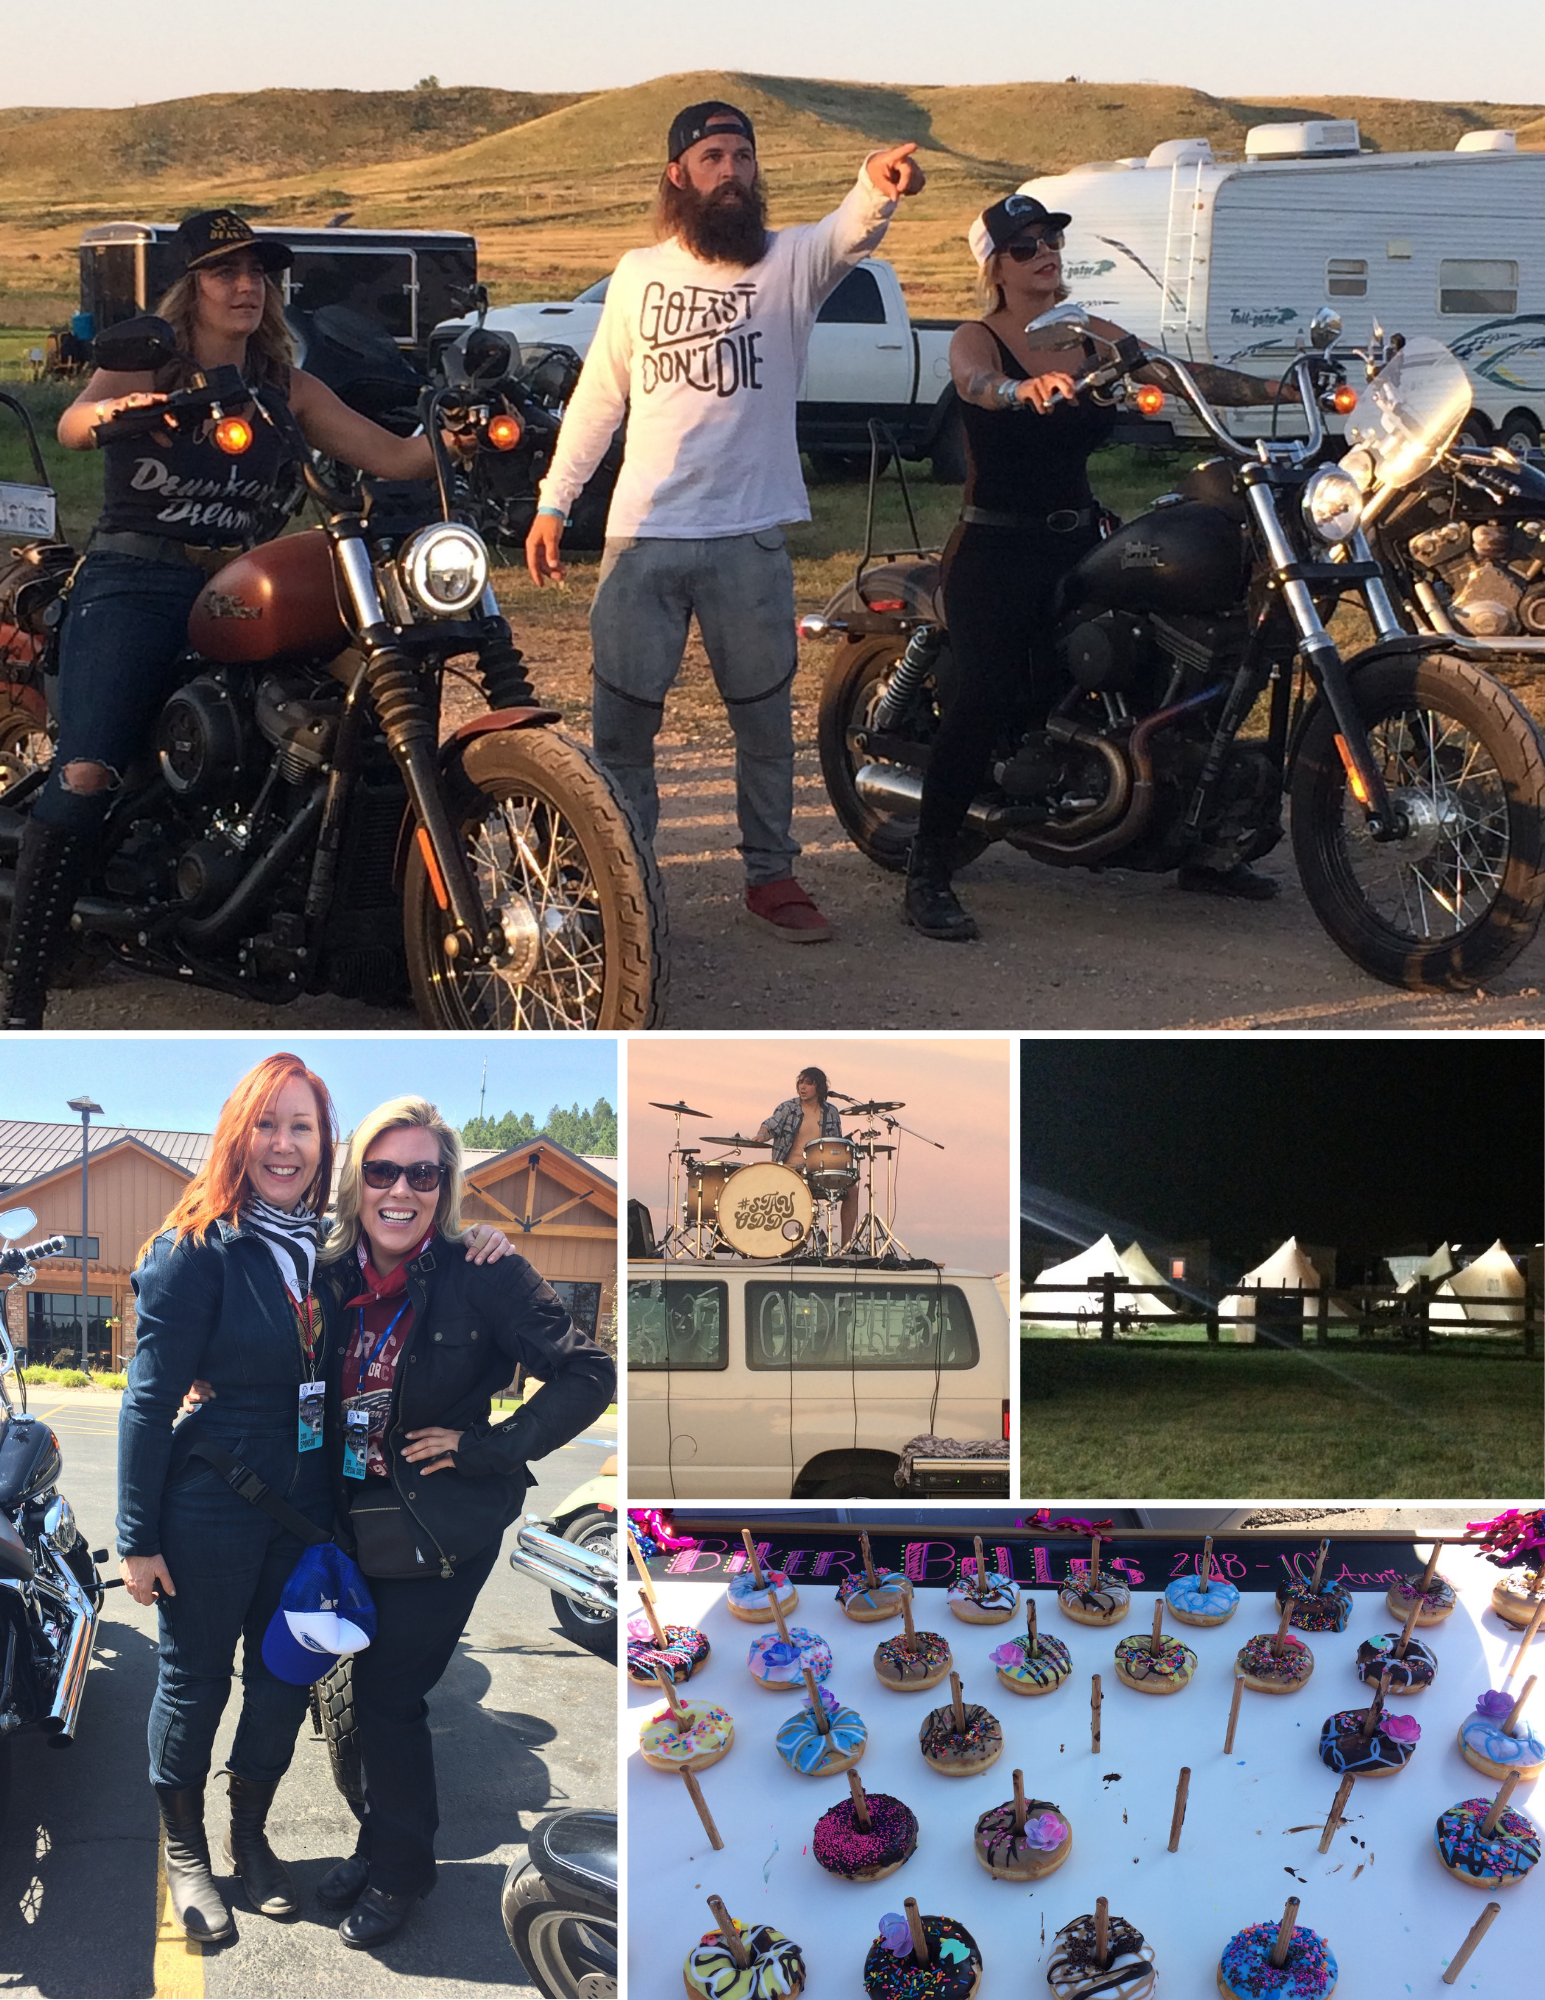 Motorcyclists camping, going for a ride, and eating doughnuts